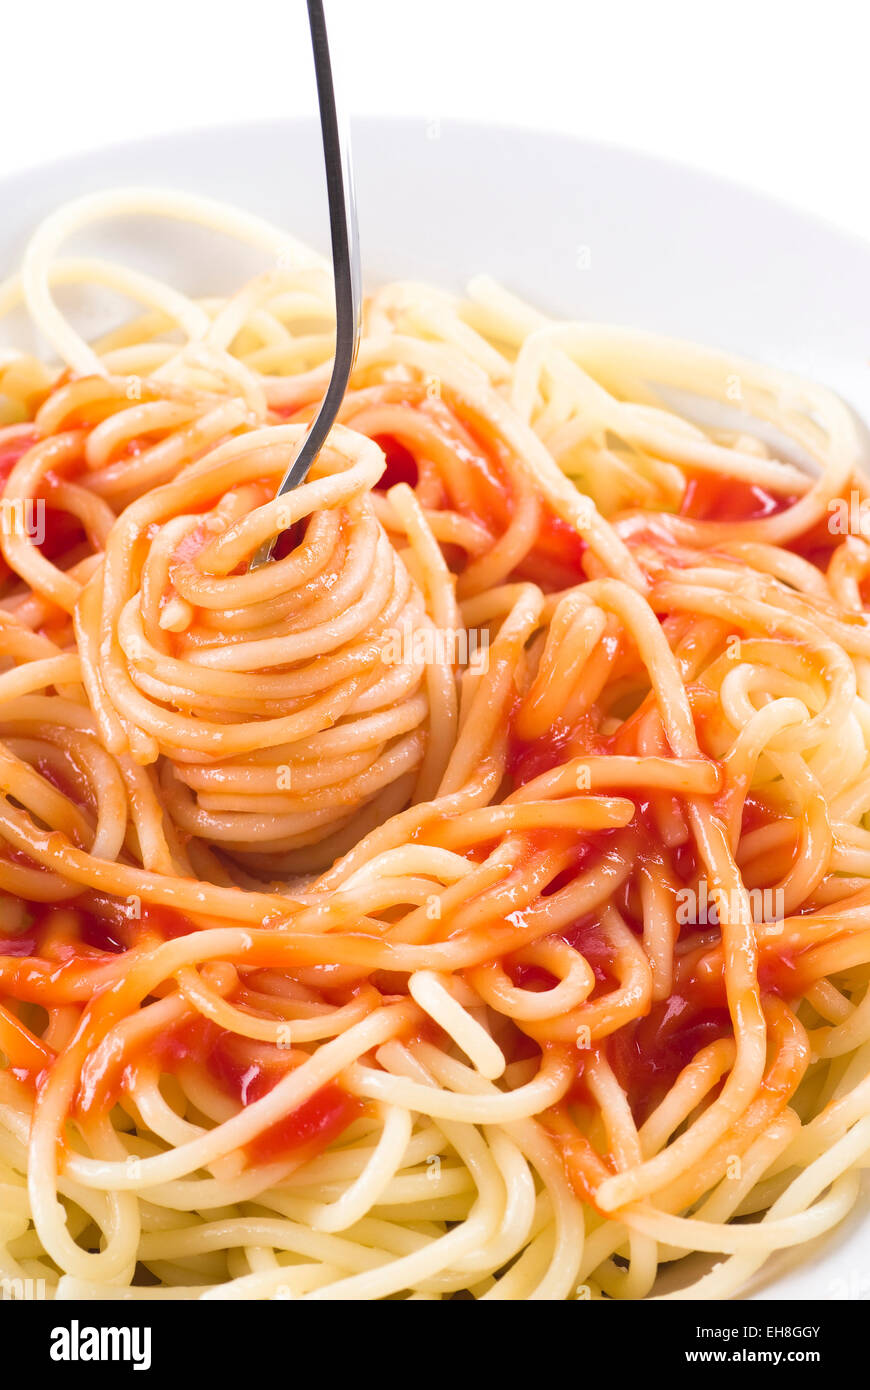 Spaghetti with ketchup in a bowl. Stock Photo